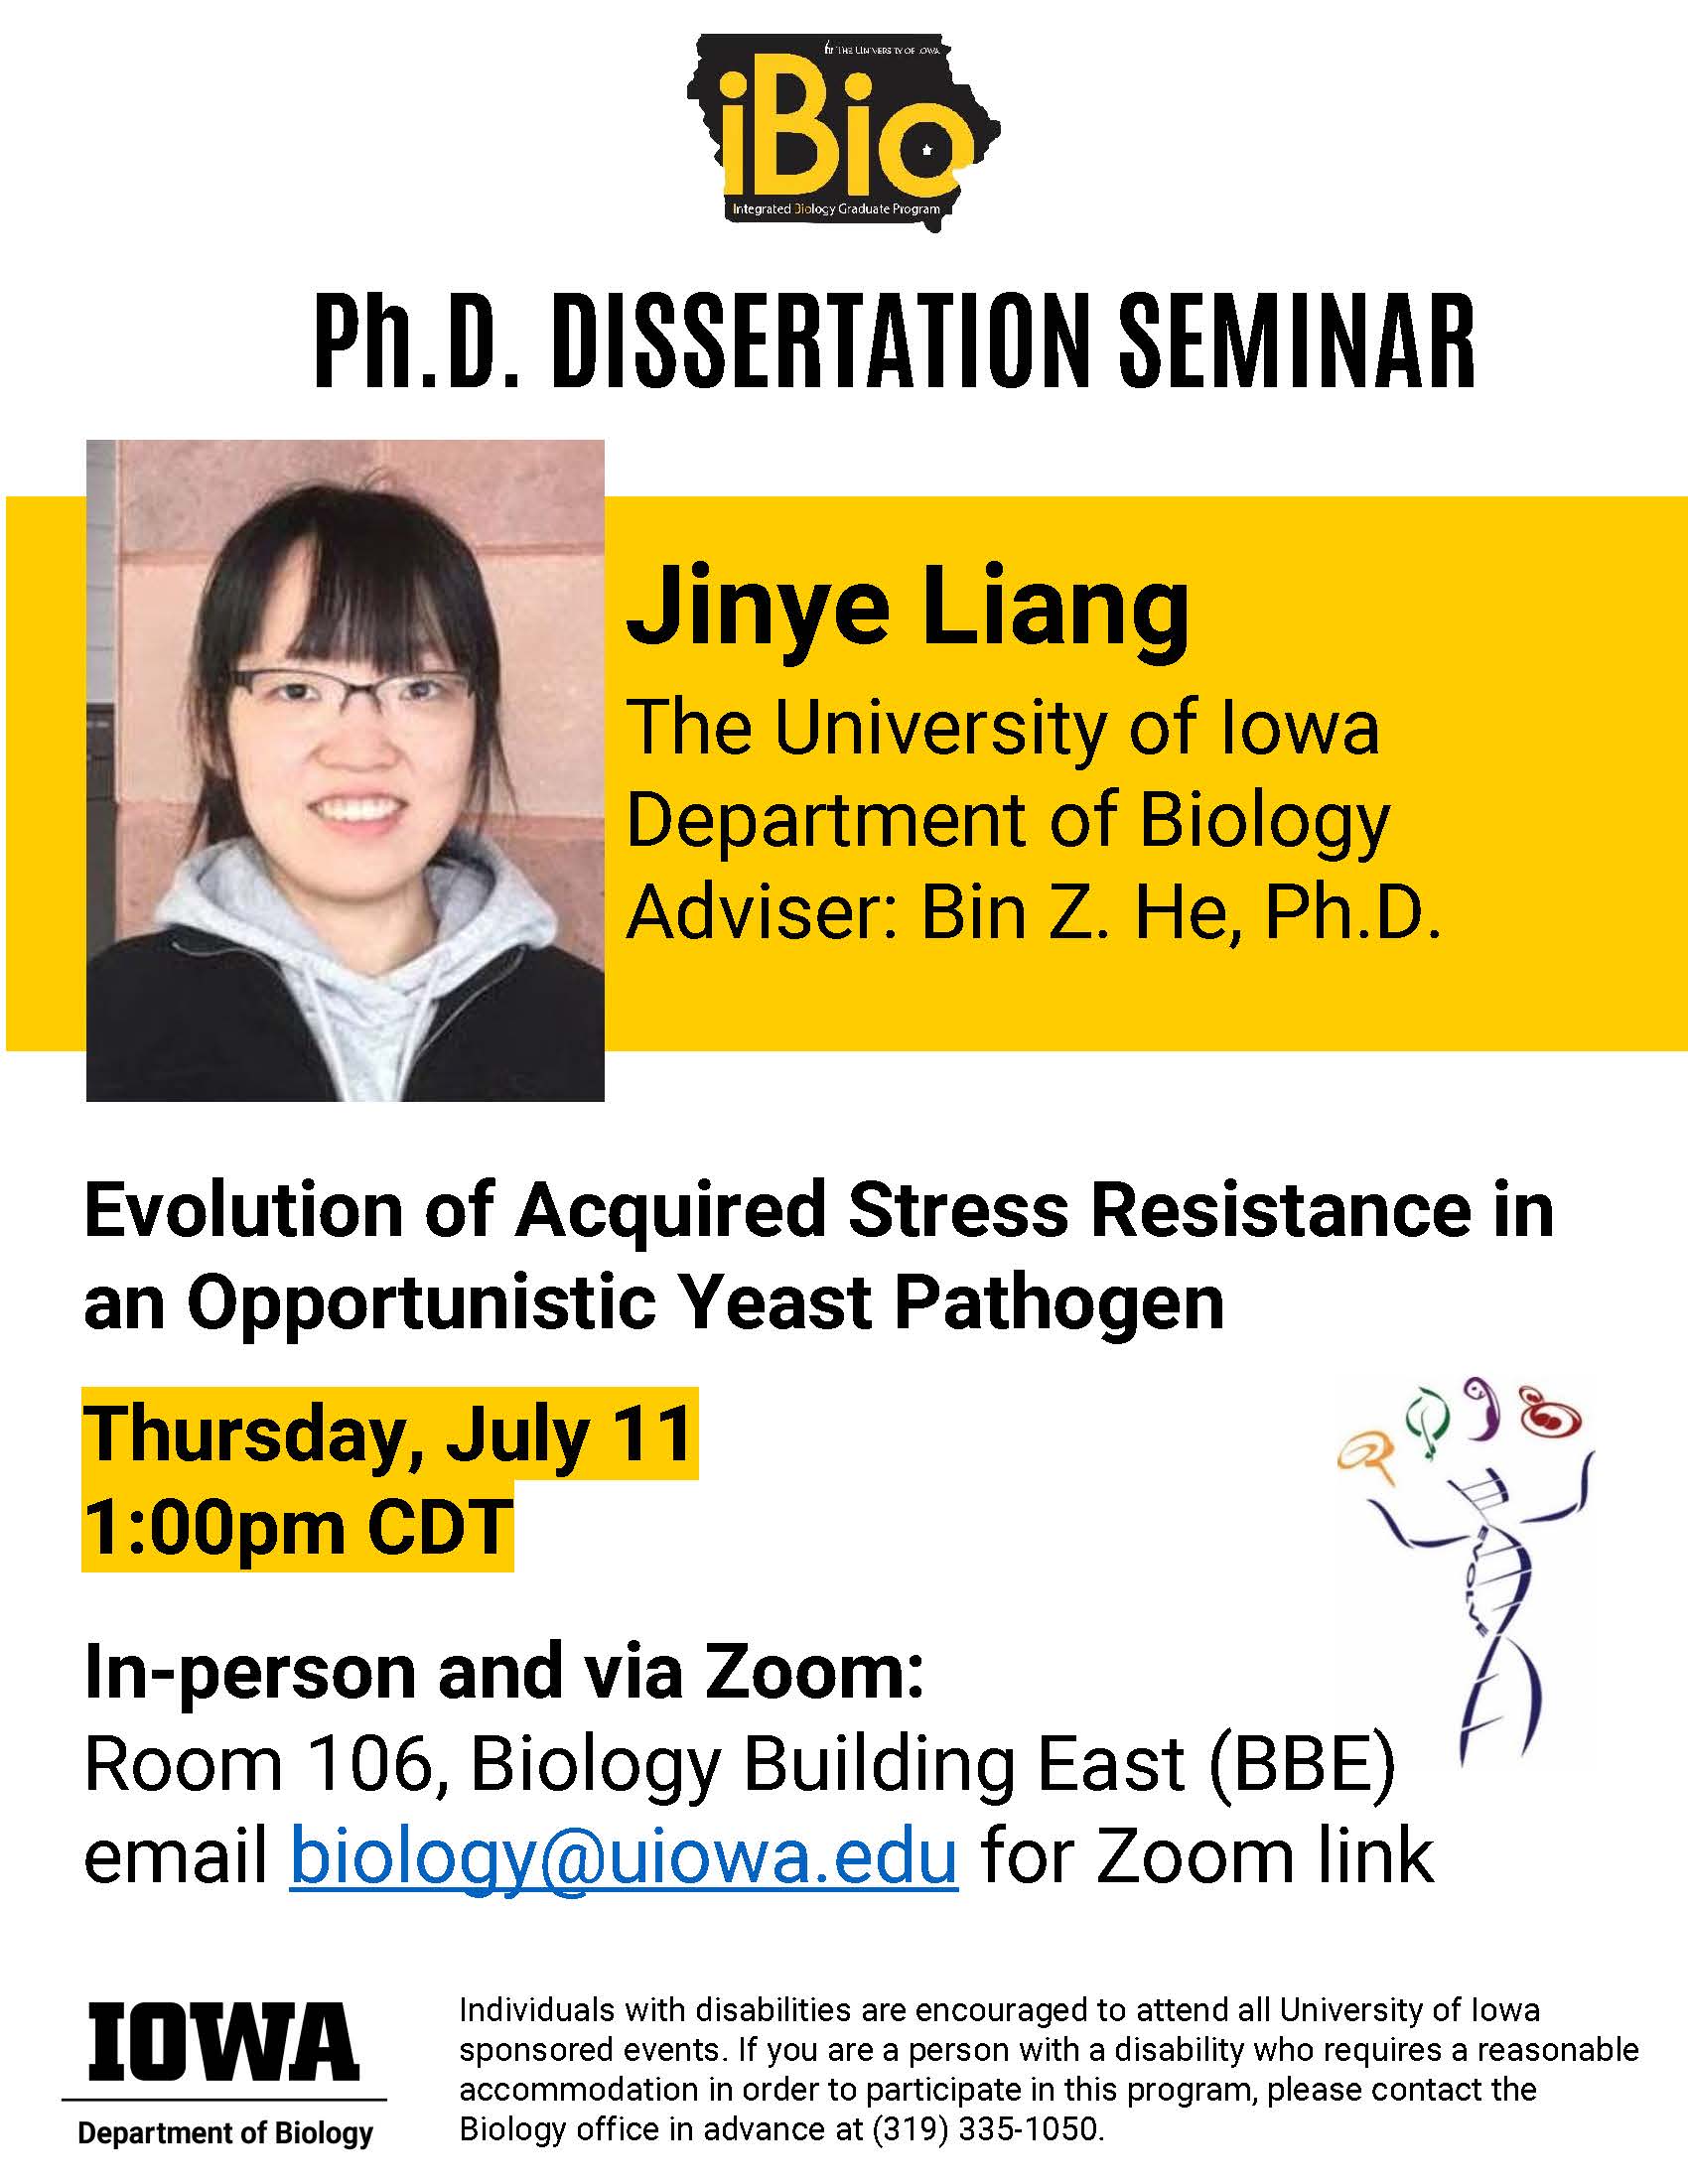 Jinye Liang's Ph.D. Dissertation Seminar on Thursday, July 11 at 1pm in 106 BBE and via Zoom